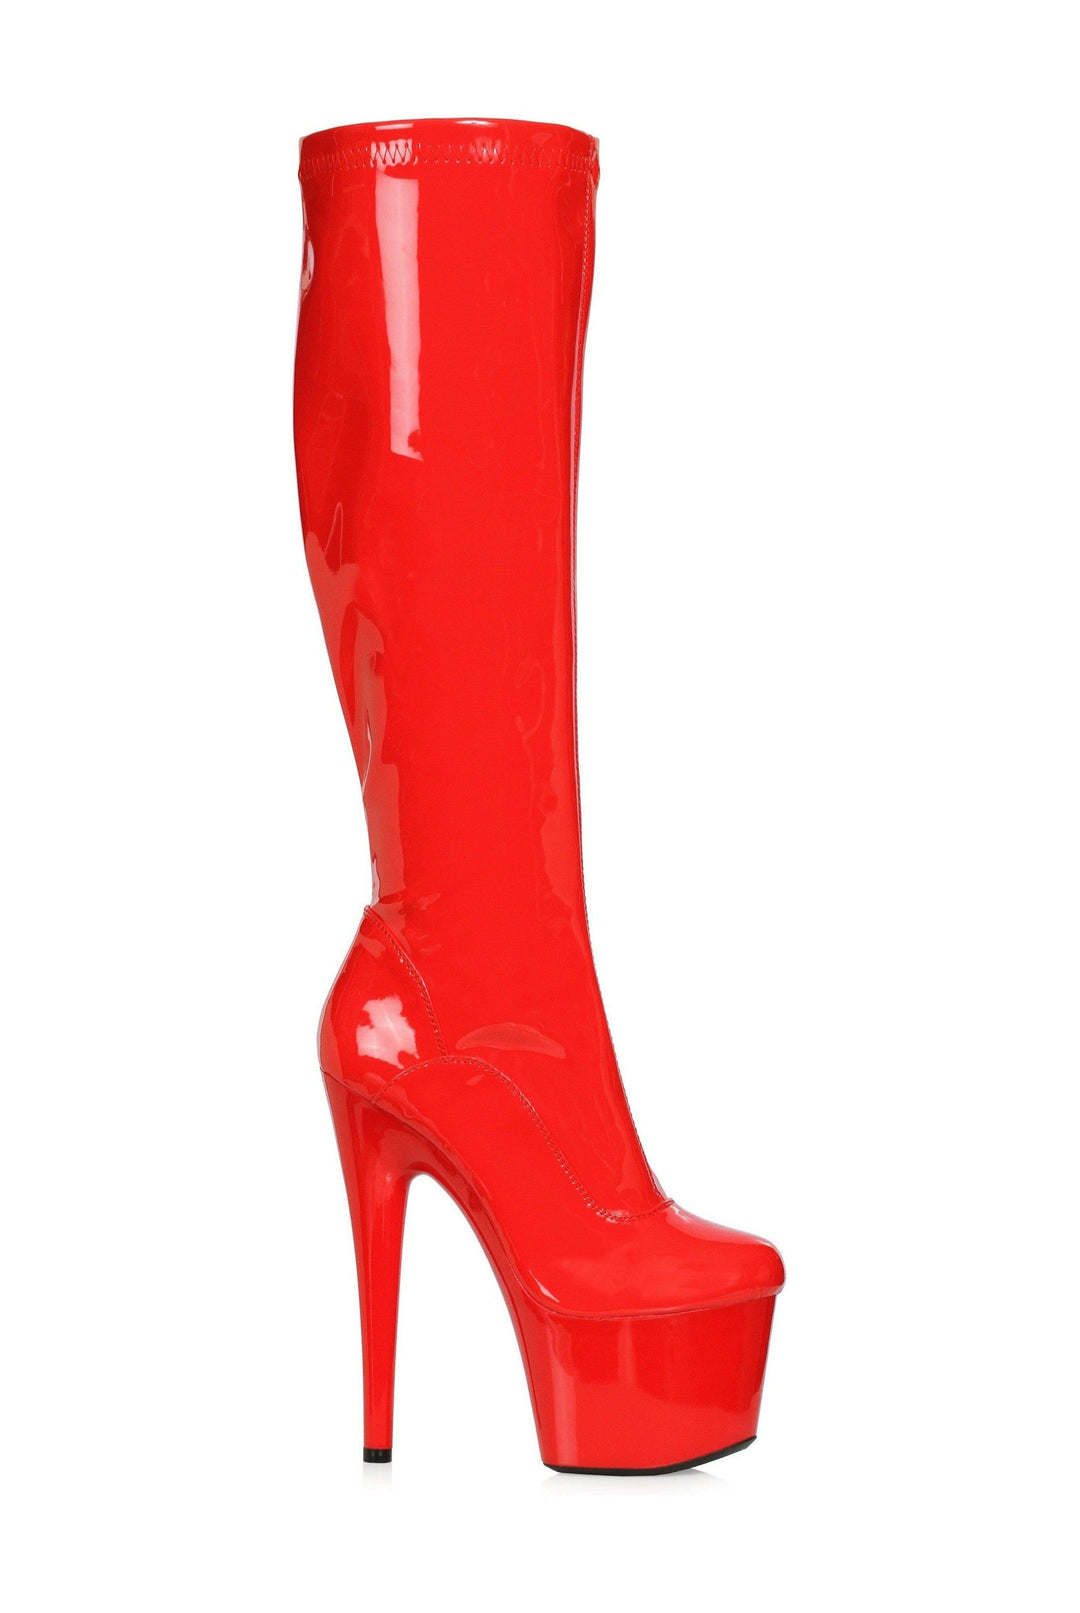 Ellie Shoes Red Knee Boots Platform Stripper Shoes | Buy at Sexyshoes.com